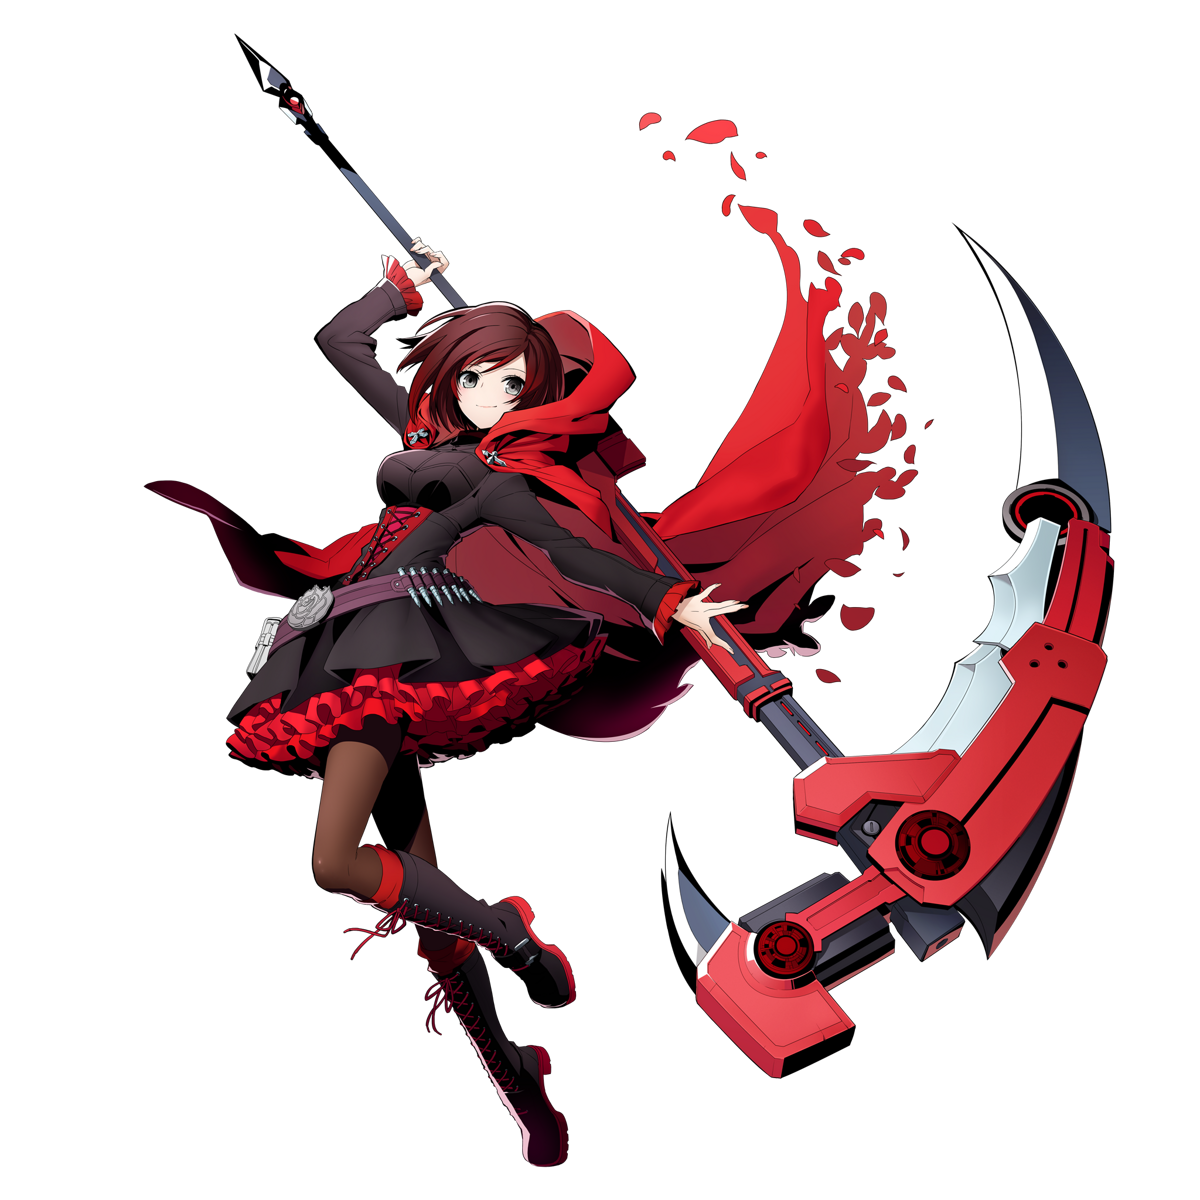 large.571796960_1200px-BlazBlue_Cross_Tag_Battle_Ruby_Rose_Main070719.png